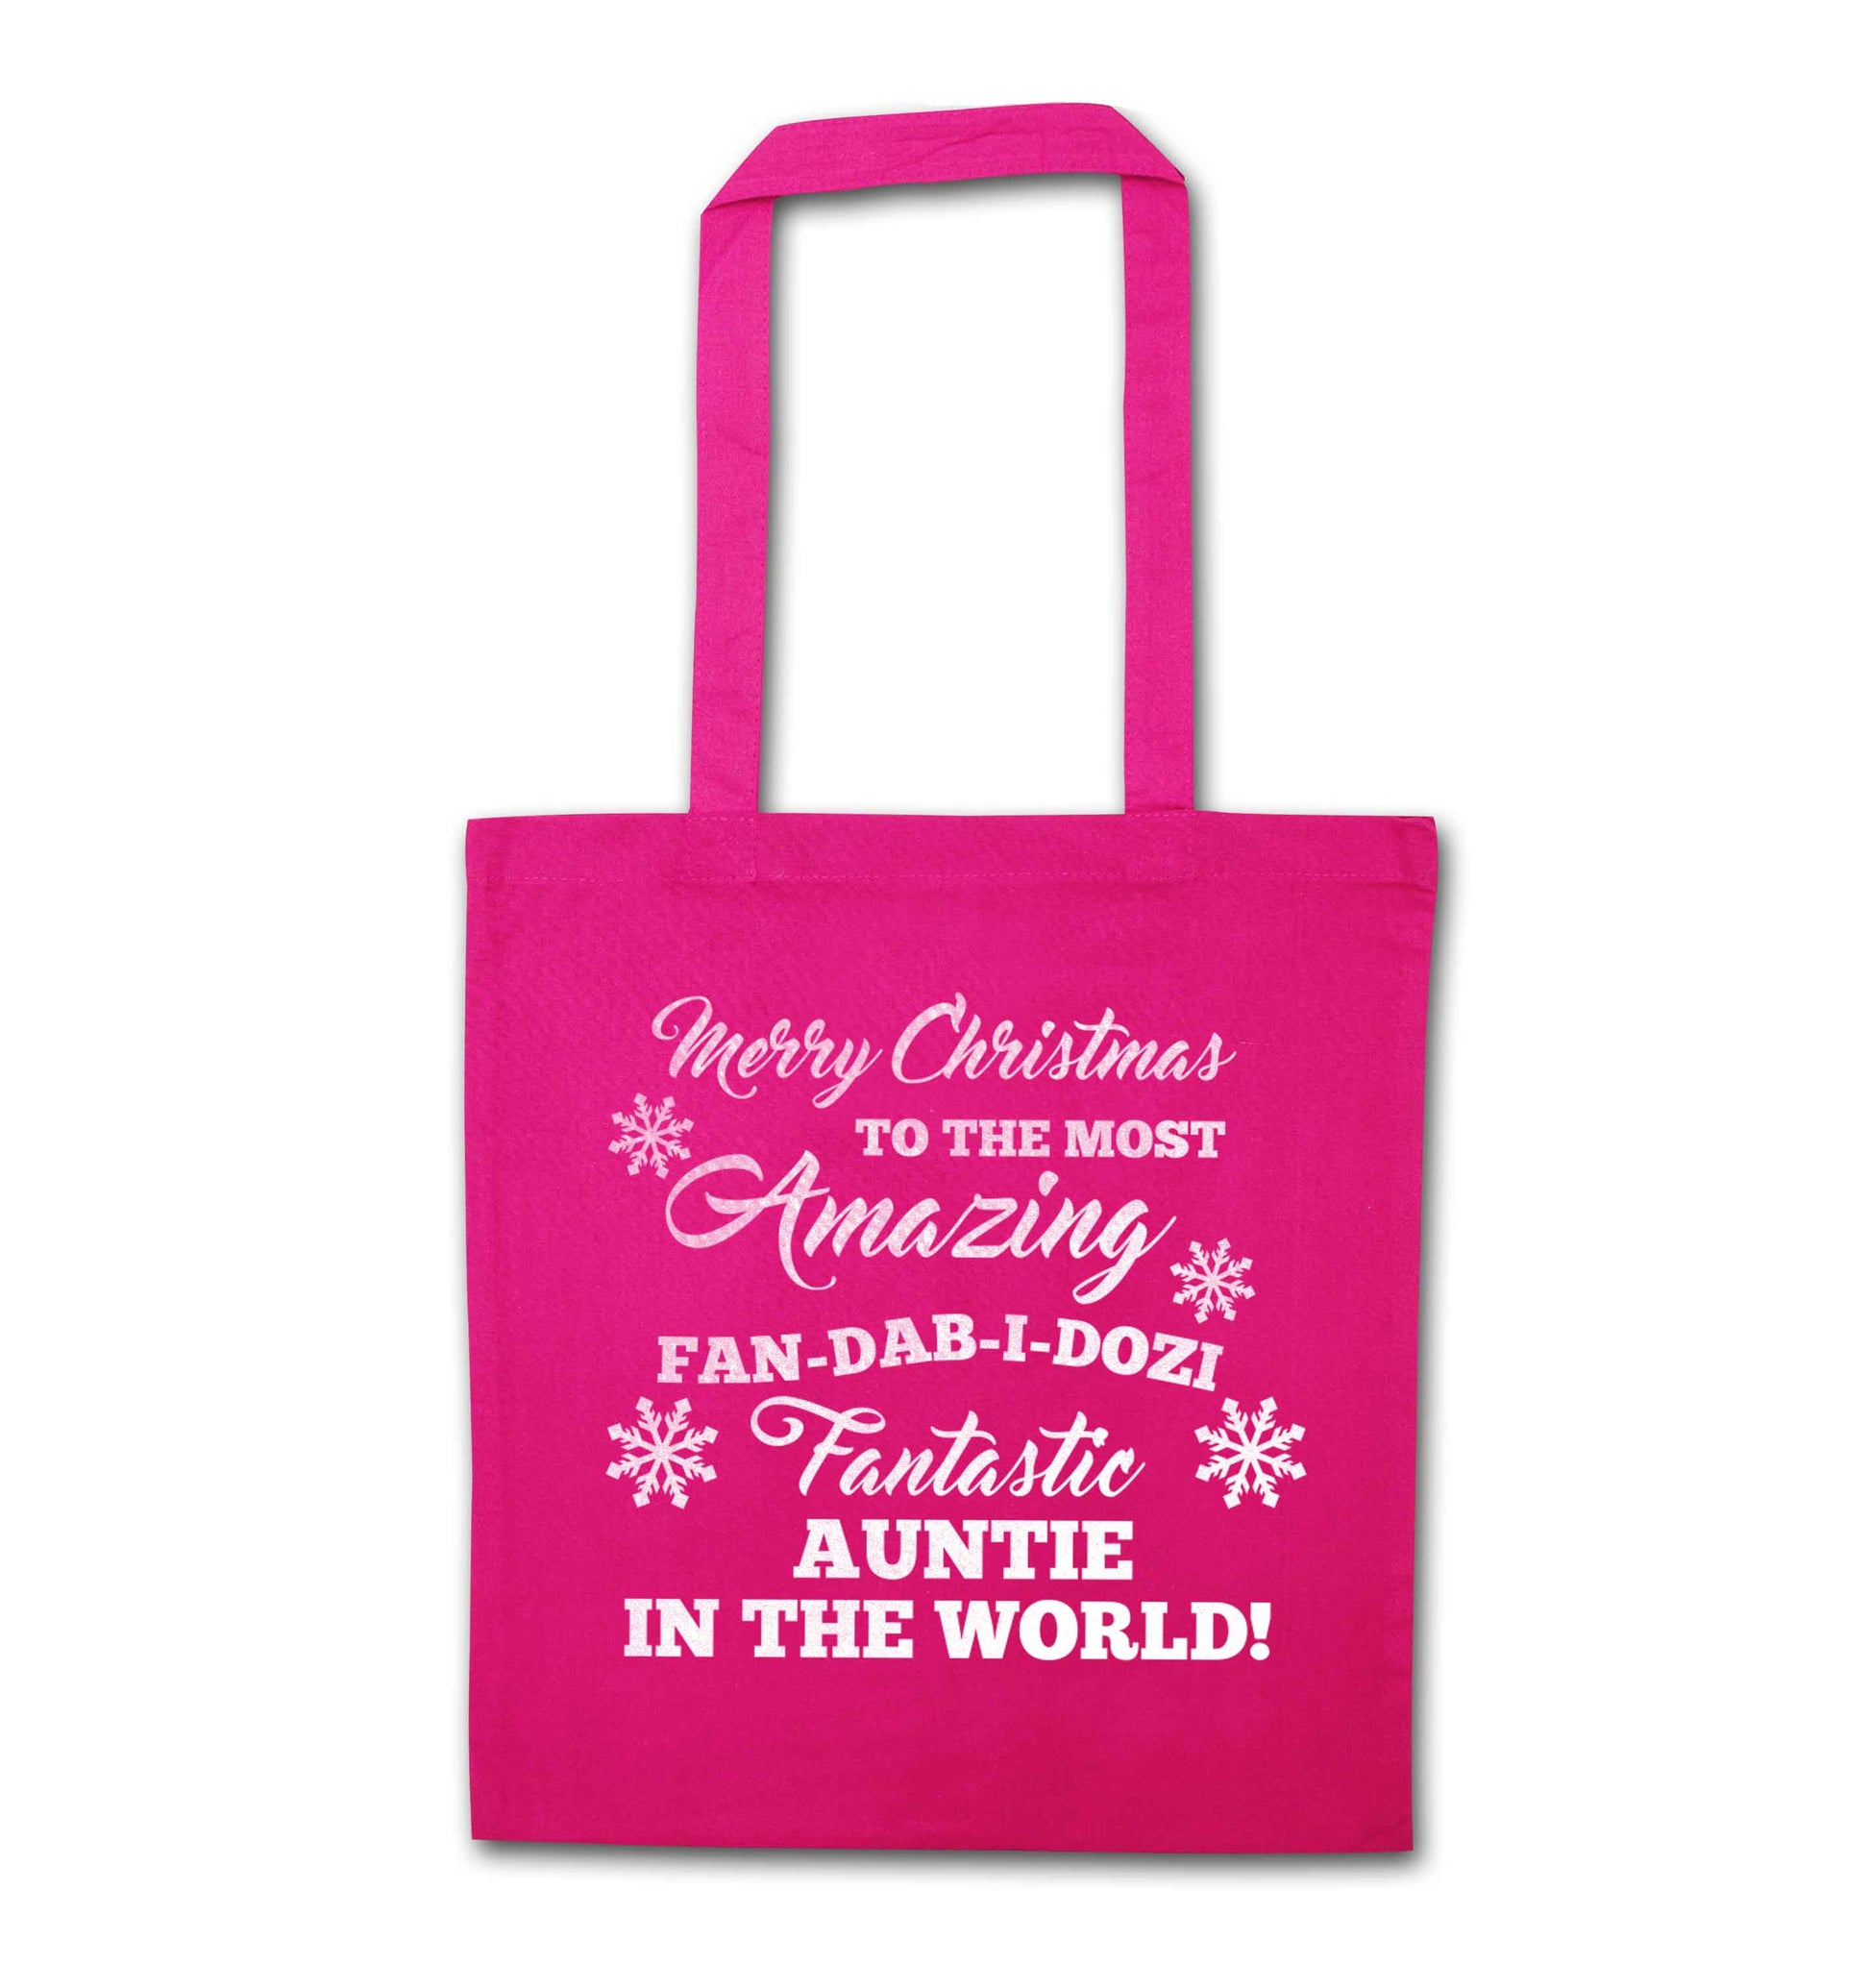 Merry Christmas to the most amazing fan-dab-i-dozi fantasic Auntie in the world pink tote bag